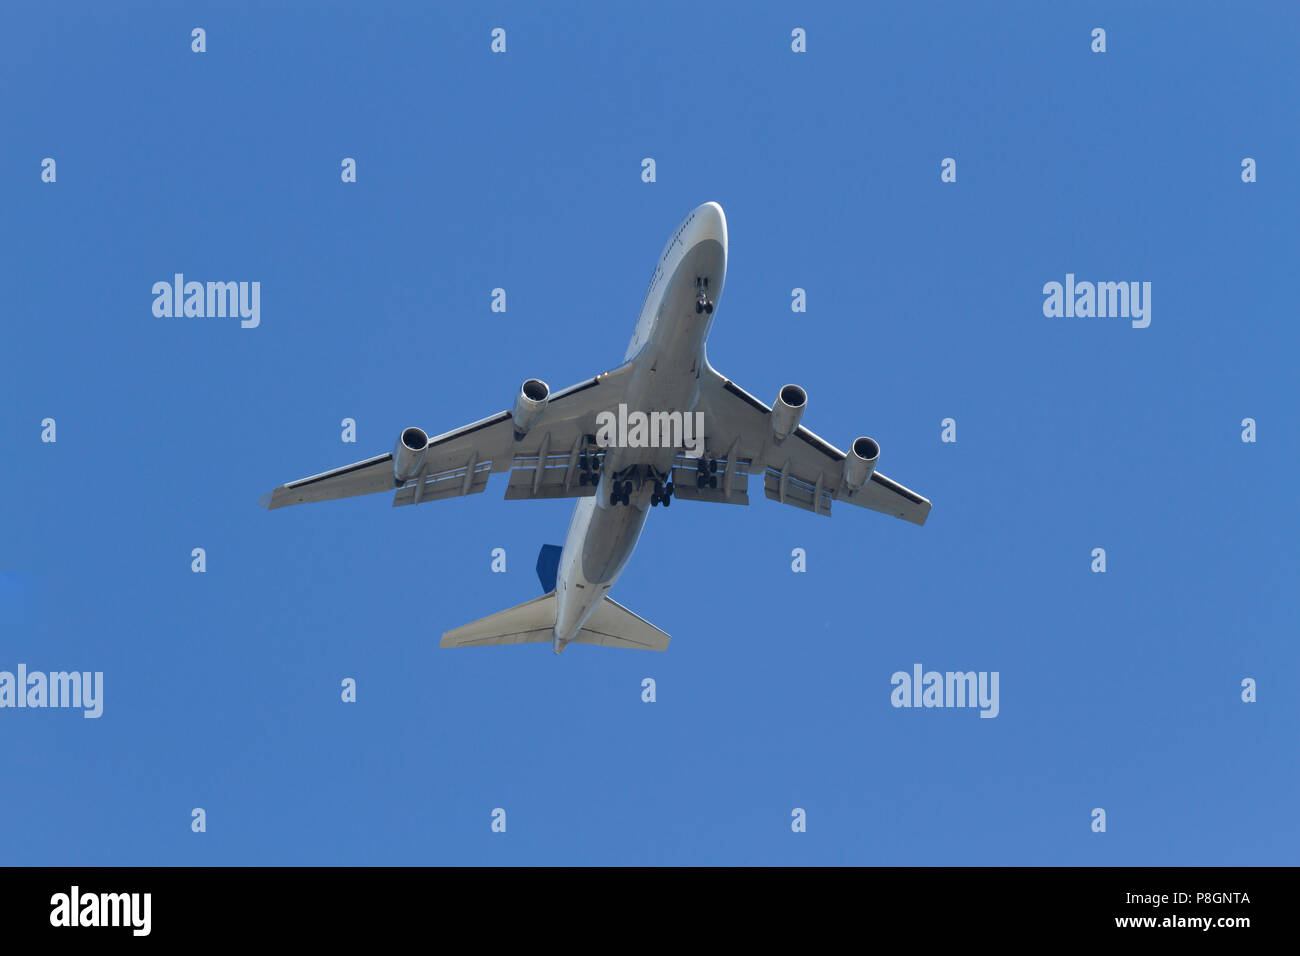 Bottom view of a passenger aircraft with the landing gear down Stock Photo